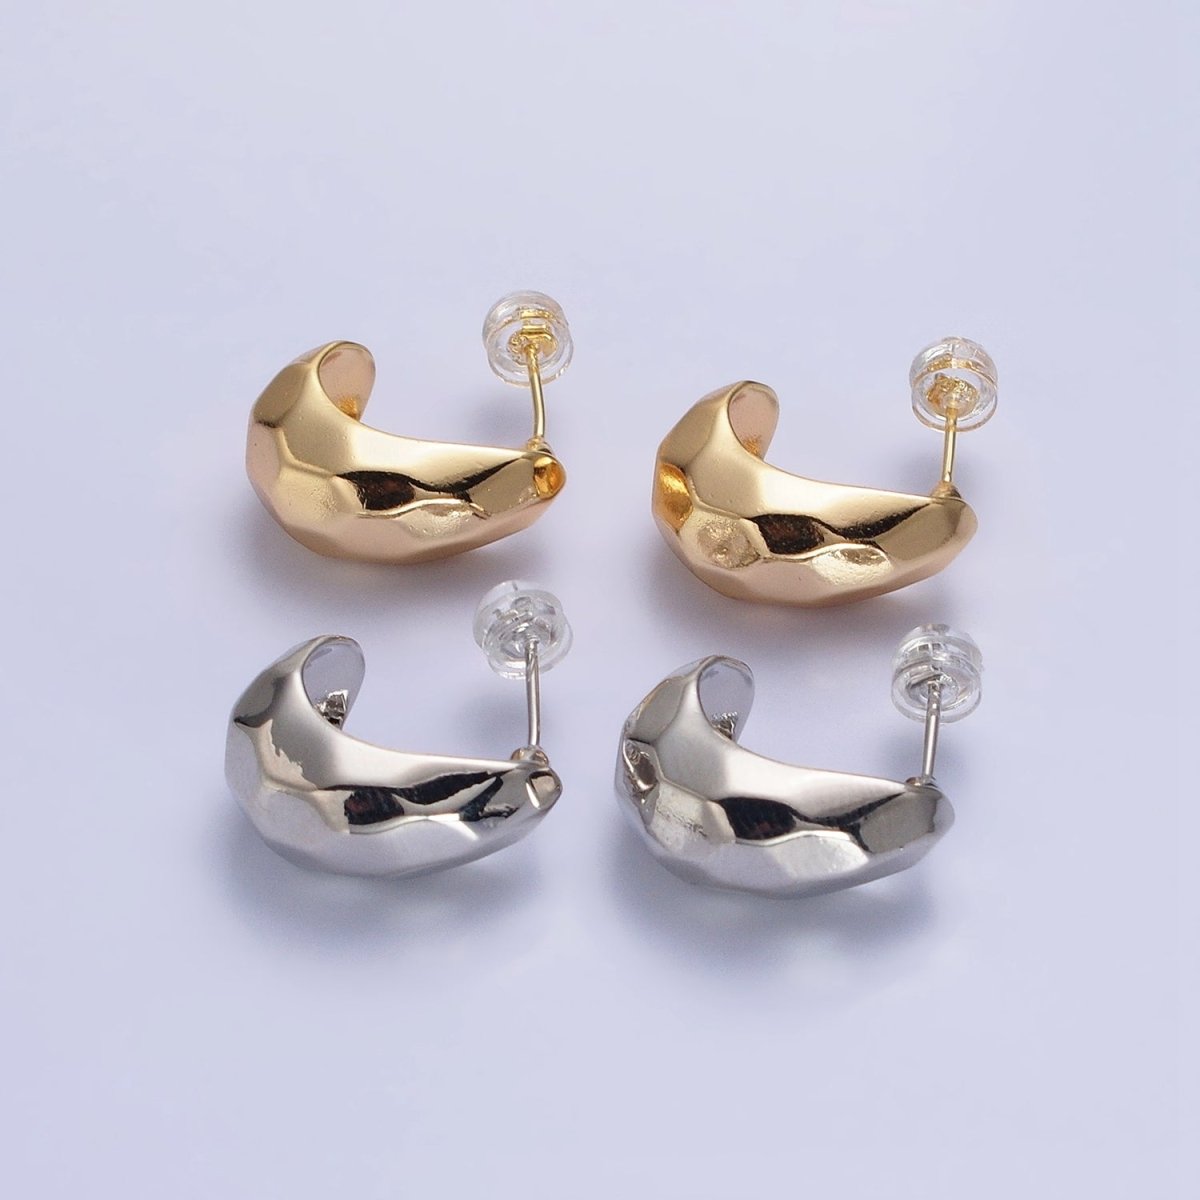 Gold, Silver Geometric Abstract Multifaceted C-Shaped Dome Hoop Earrings | AB587 AB588 - DLUXCA